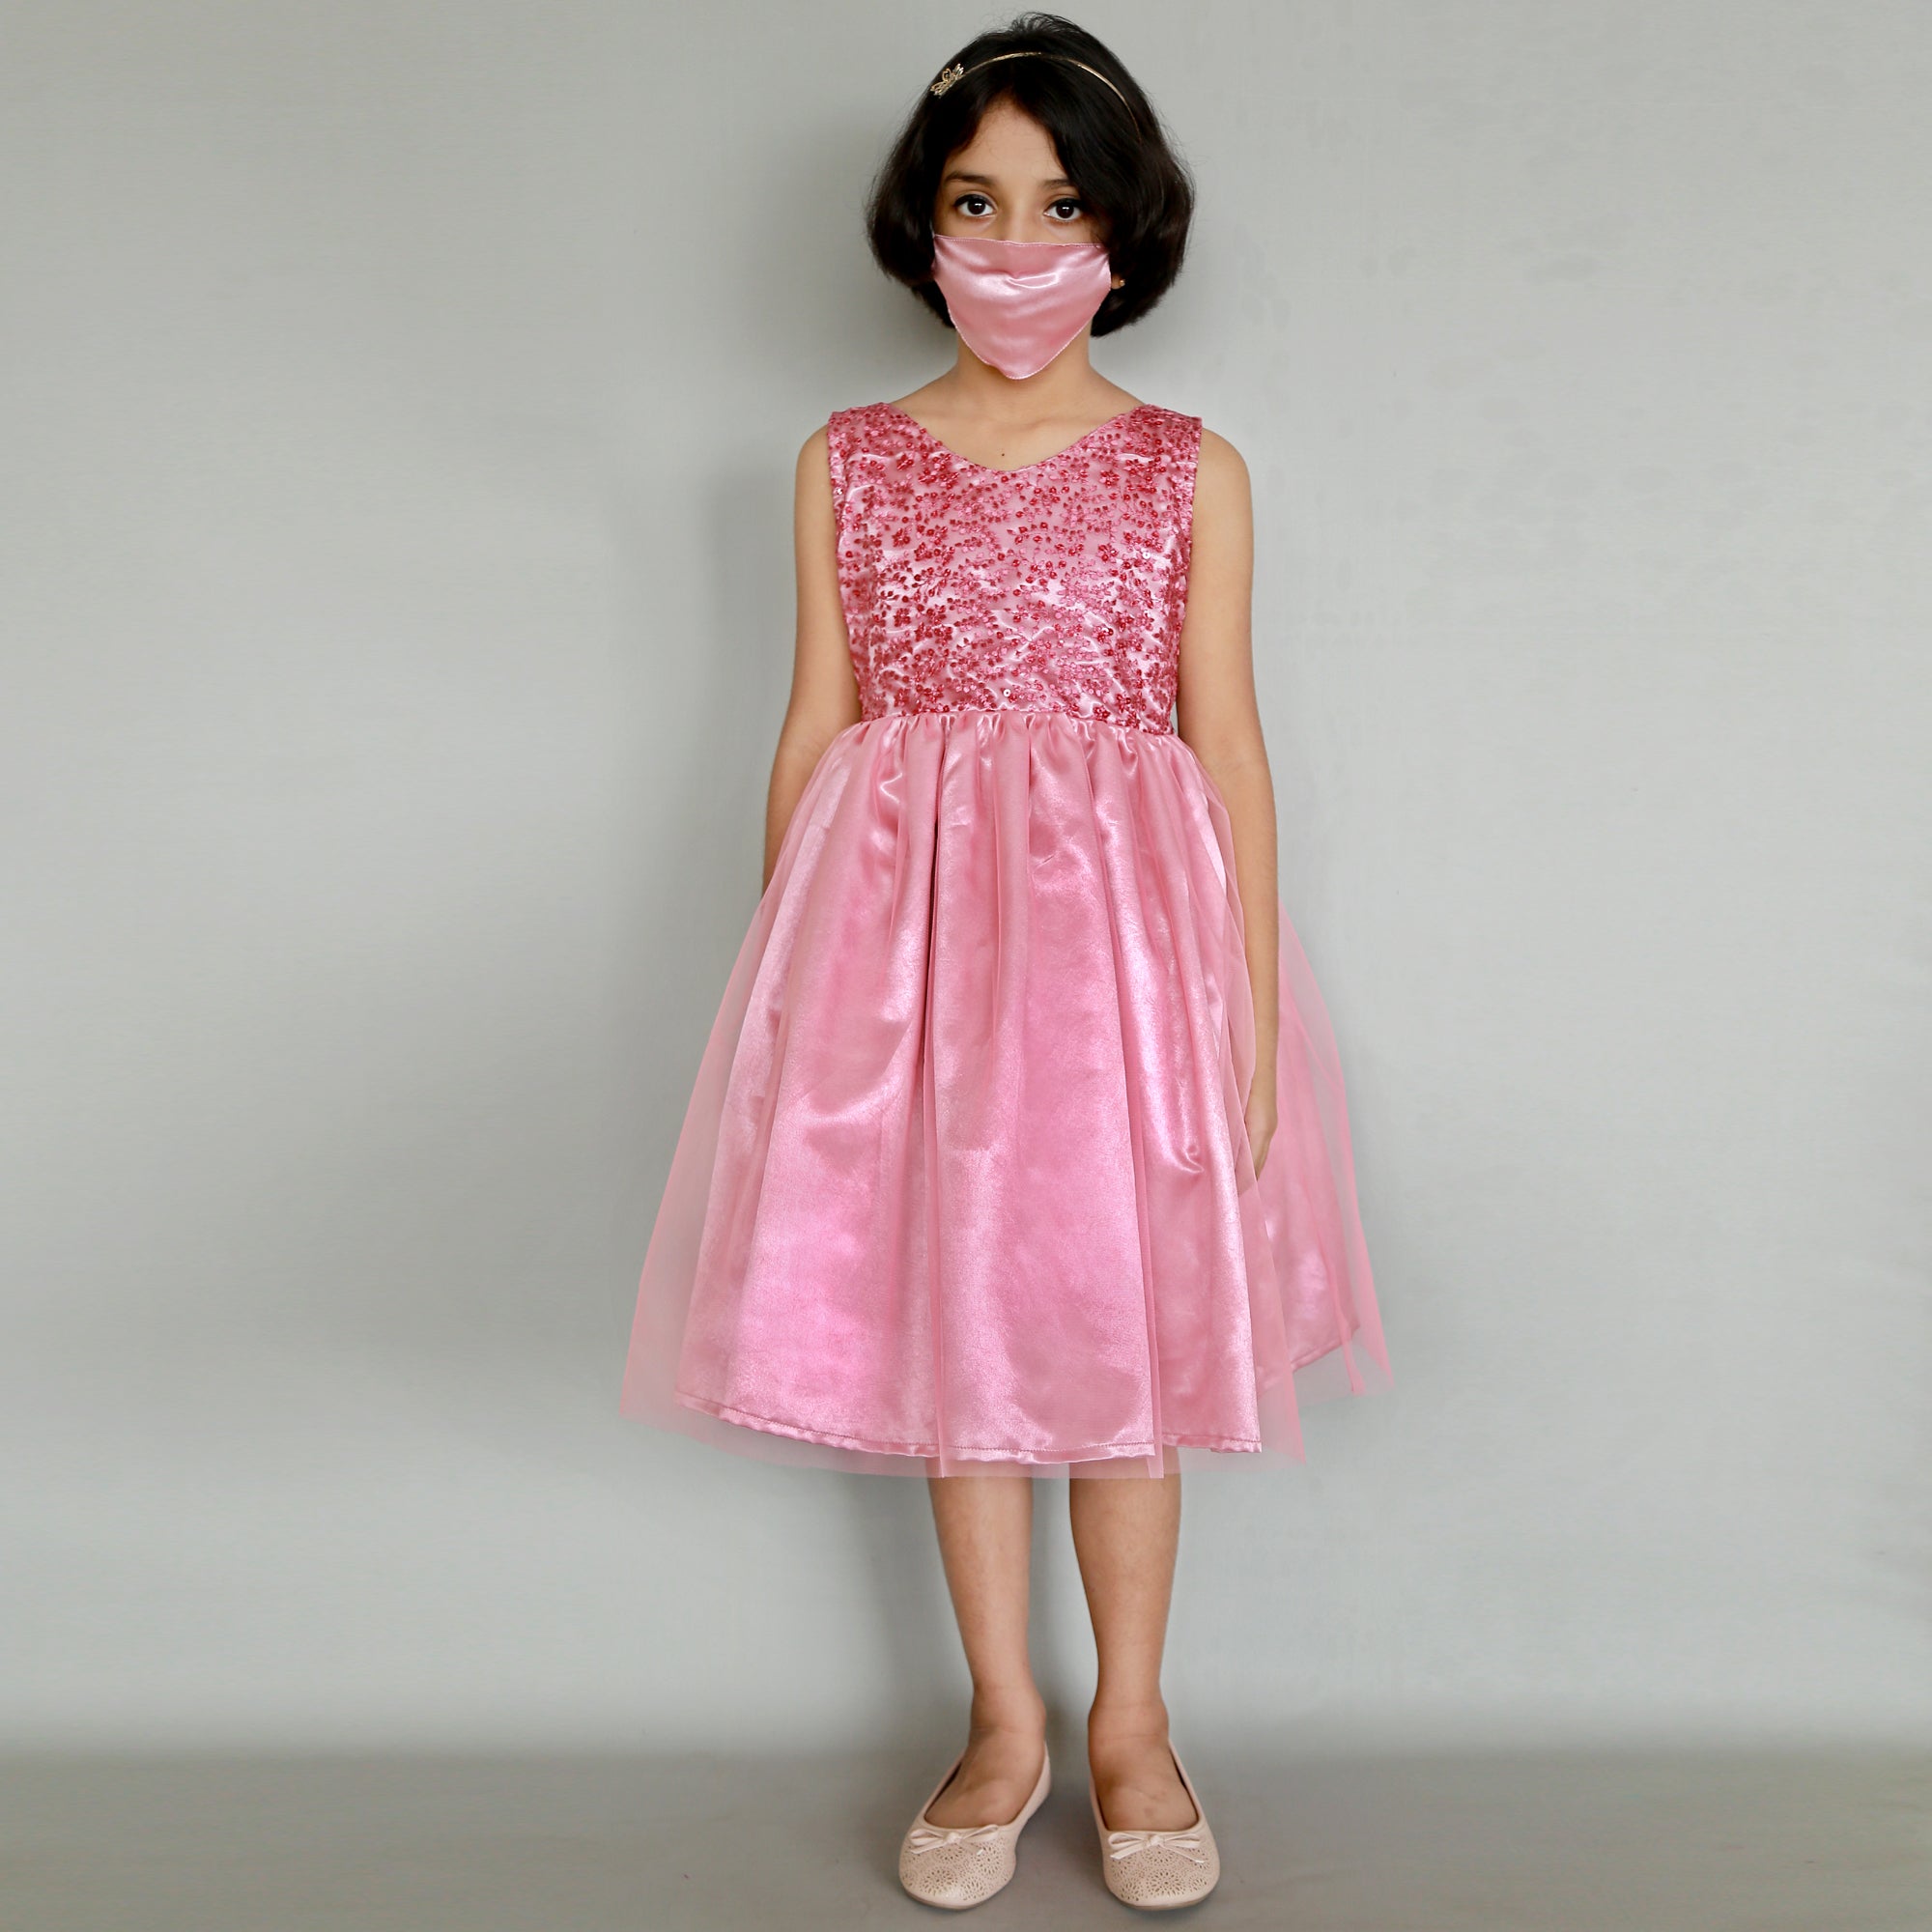 Party dresses for kids 2022 lace| Alibaba.com